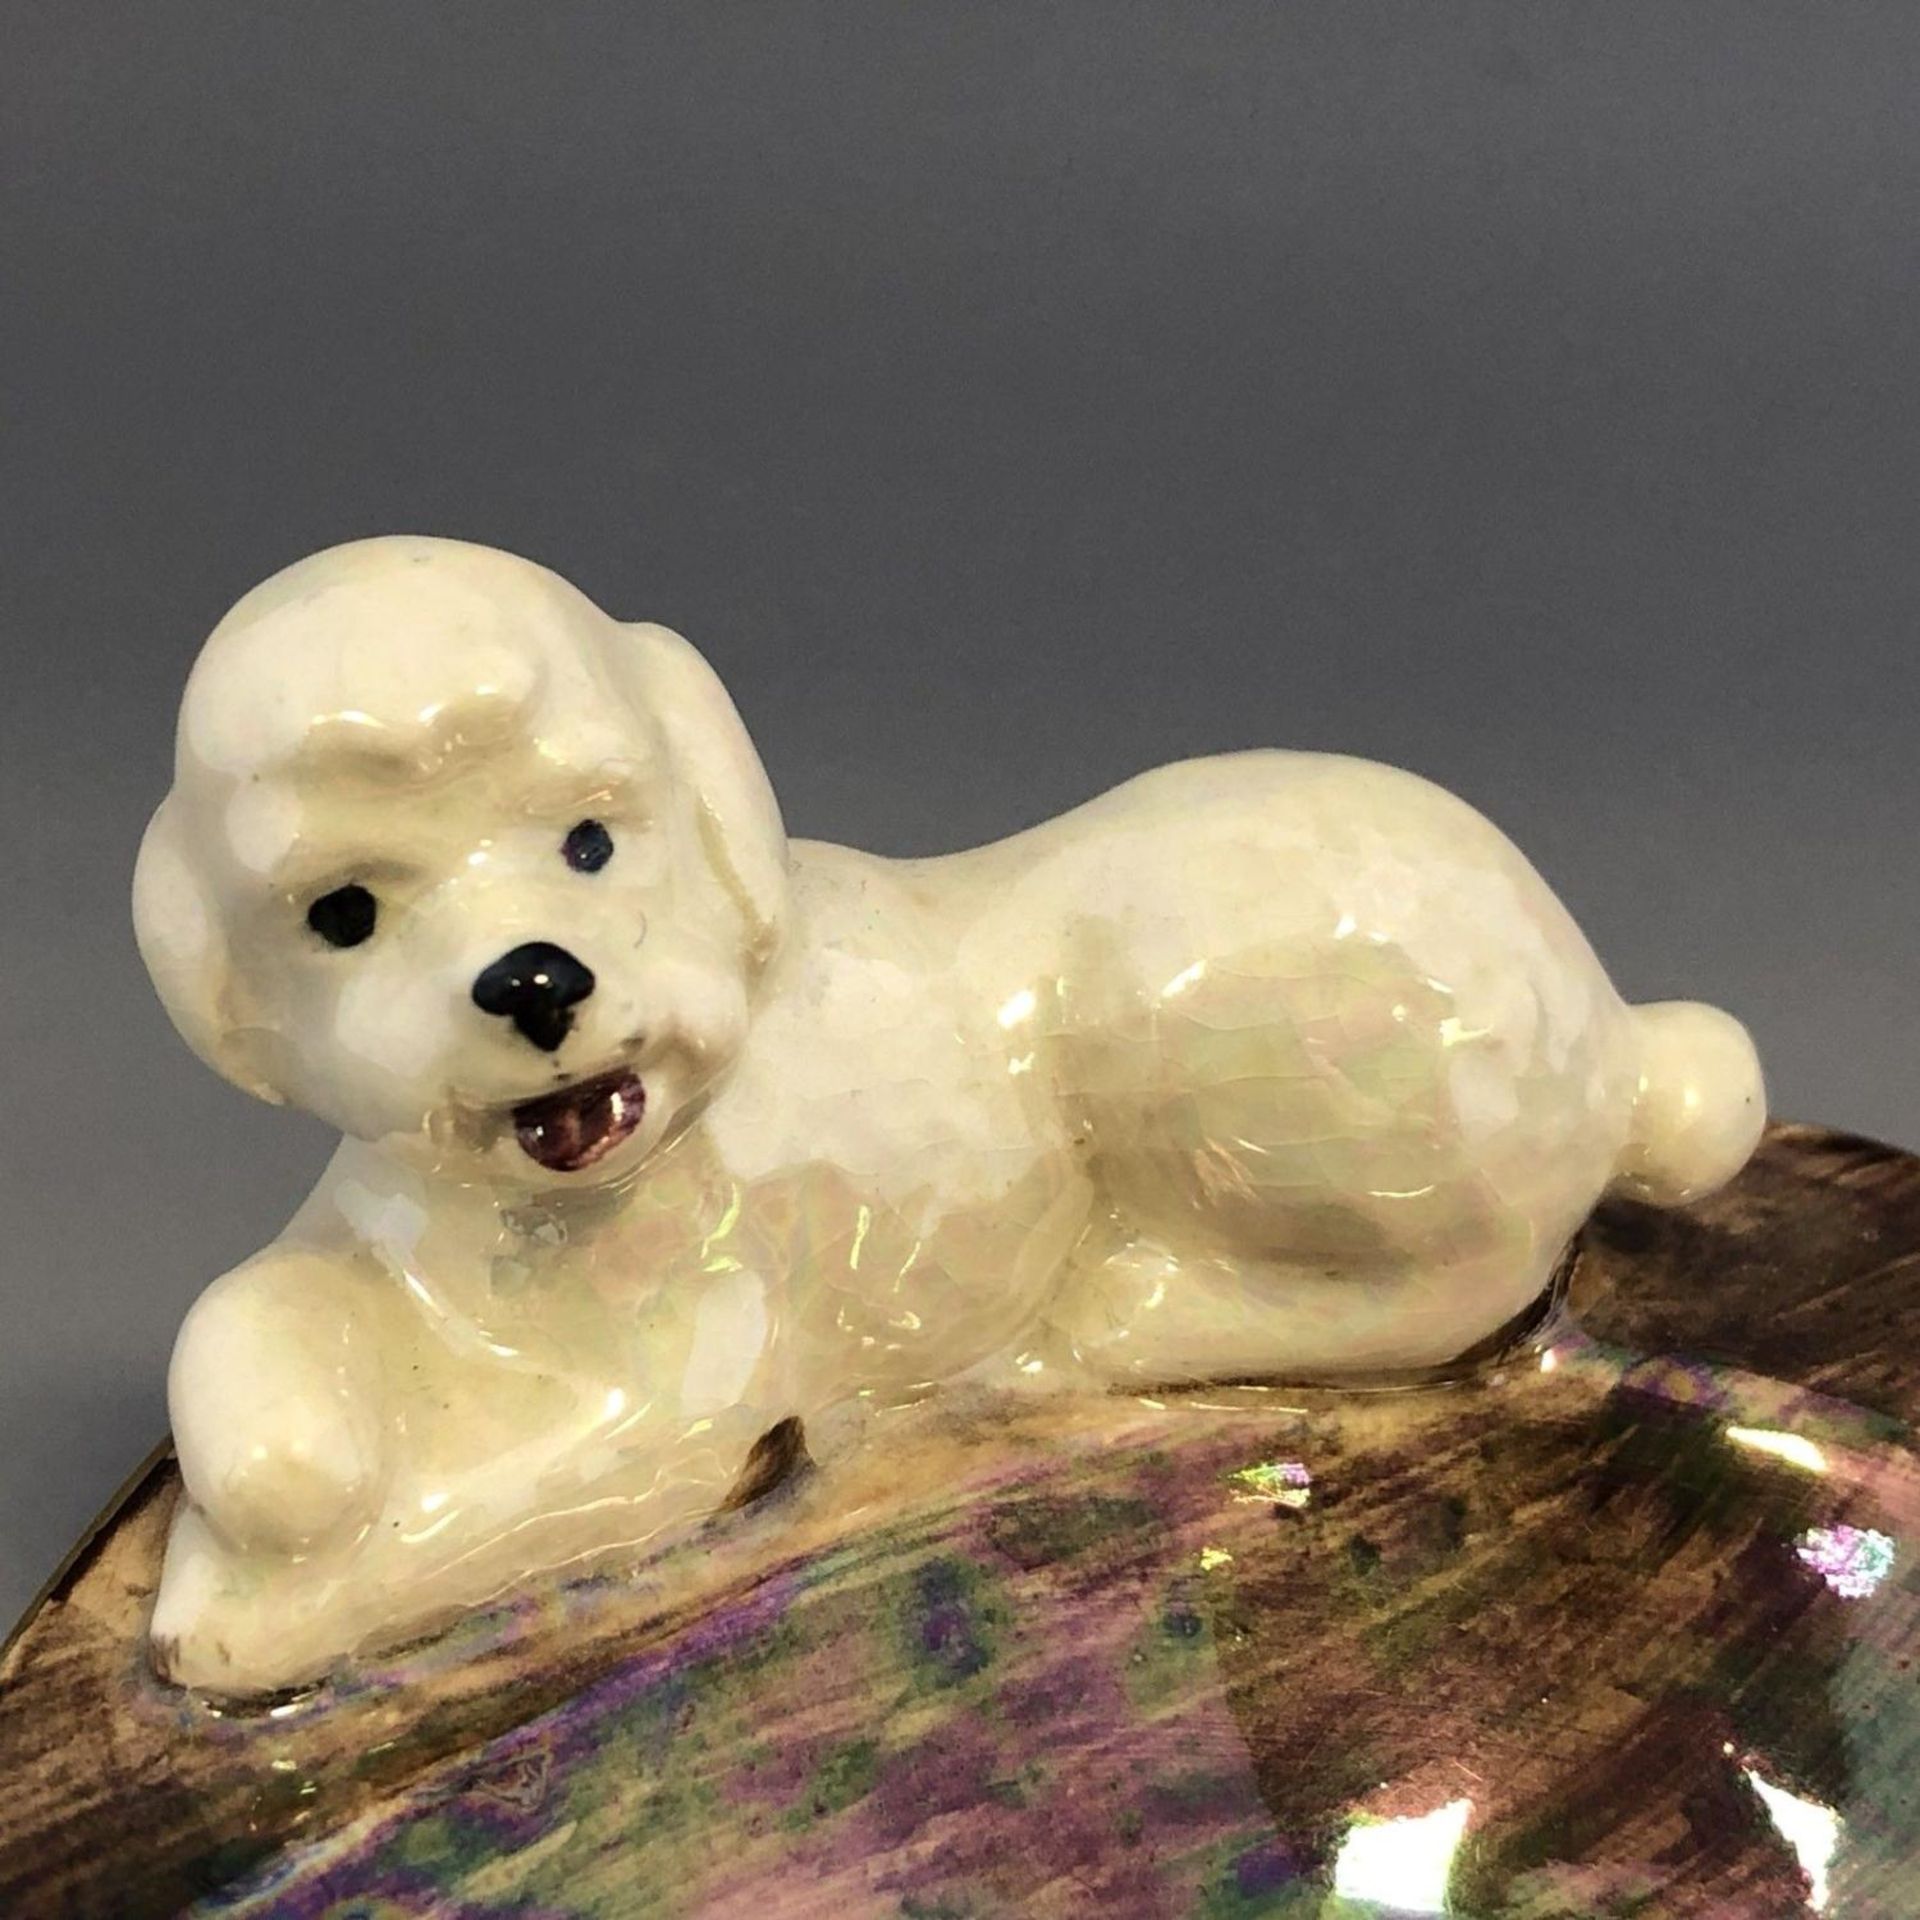 Vintage Retro Kitsch Old Court Ware Lustre Glaze Ash Tray with White Poodle Dog - Image 6 of 6